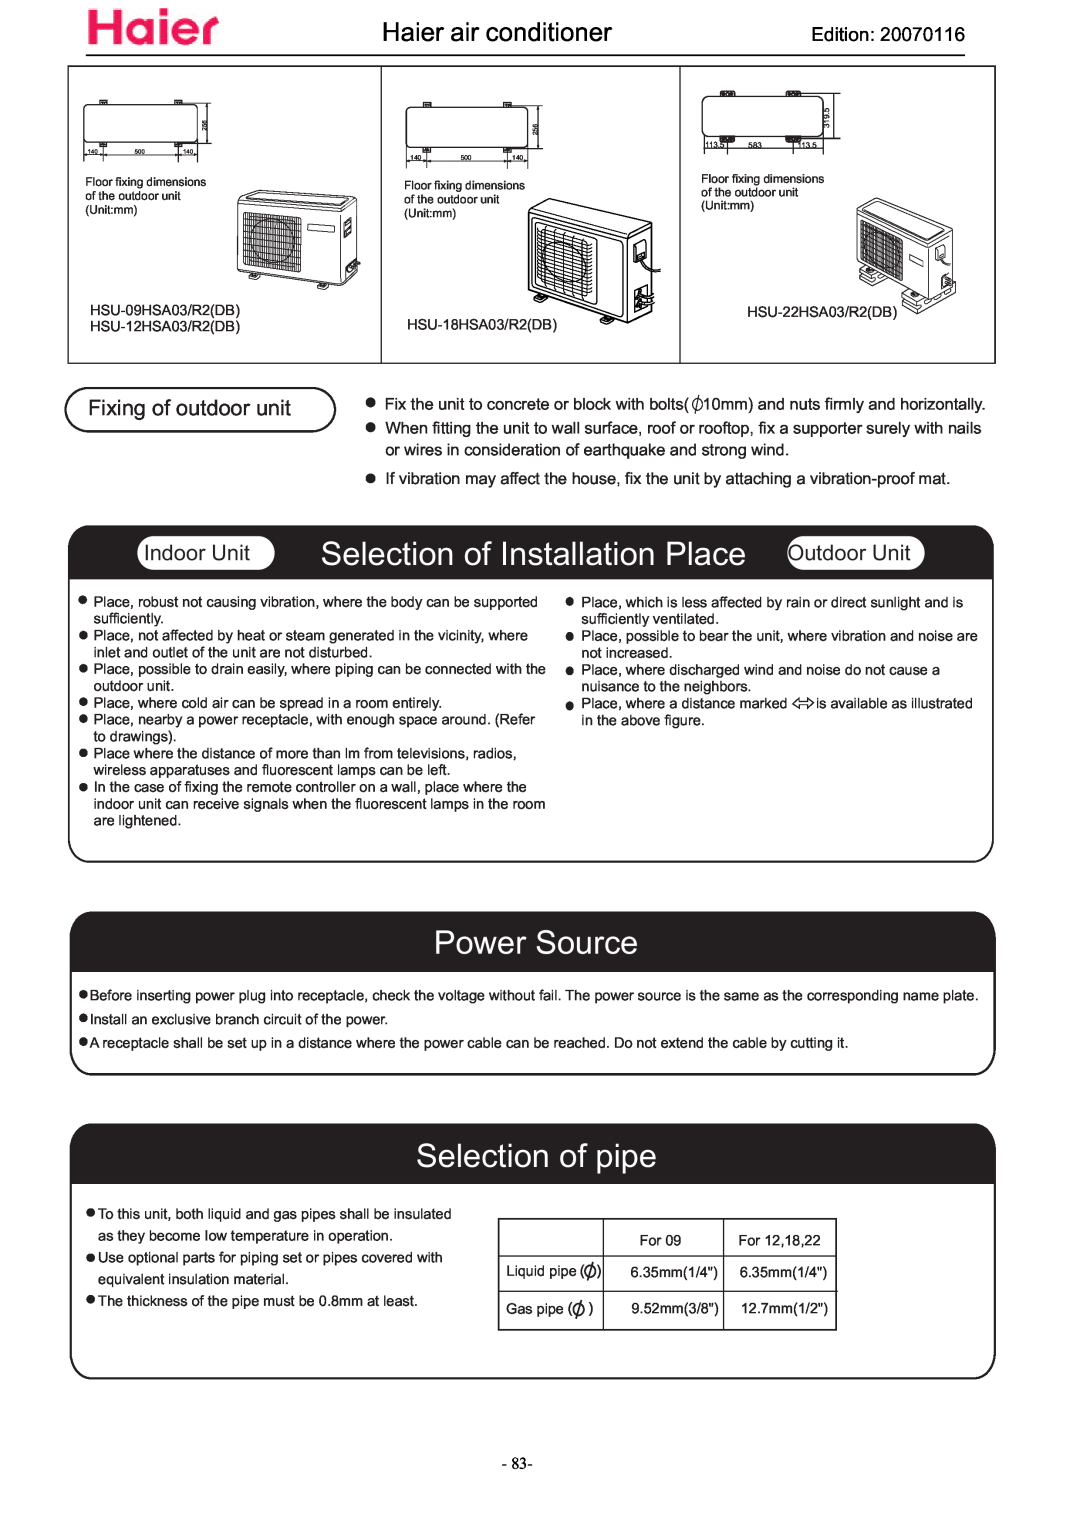 Haier HSU-12HSA03/R2(DB) manual Selection of Installation Place Outdoor Unit, Power Source, Selection of pipe, Indoor Unit 